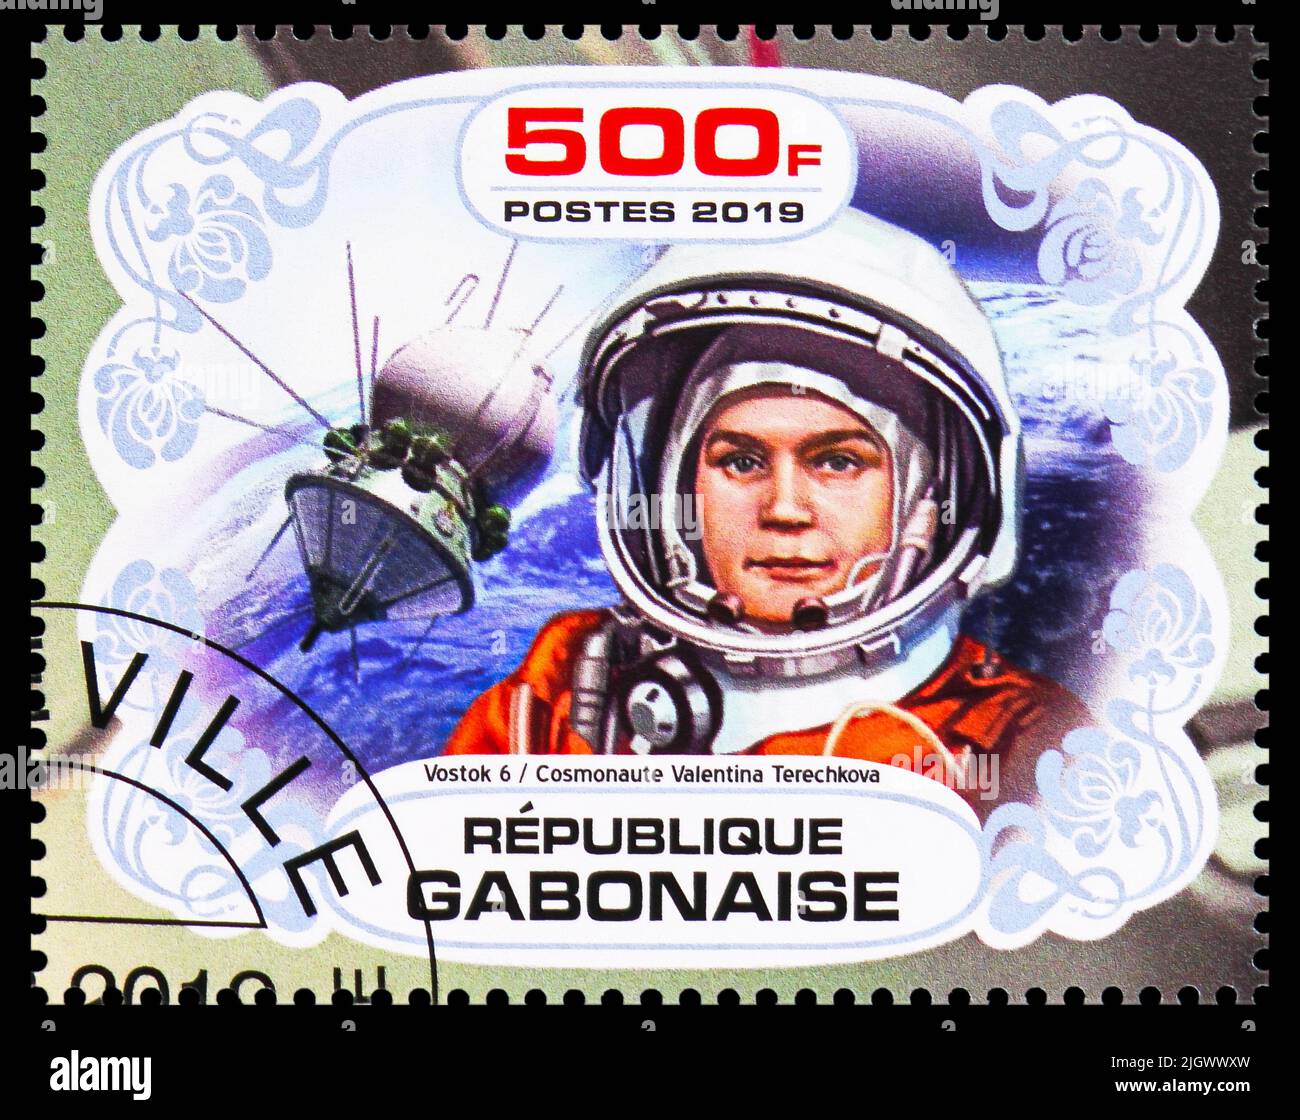 MOSCOW, RUSSIA - JUNE 17, 2022: Postage stamp printed in Gabon shows Valentina Tereshkova, Space programs serie, circa 2019 Stock Photo